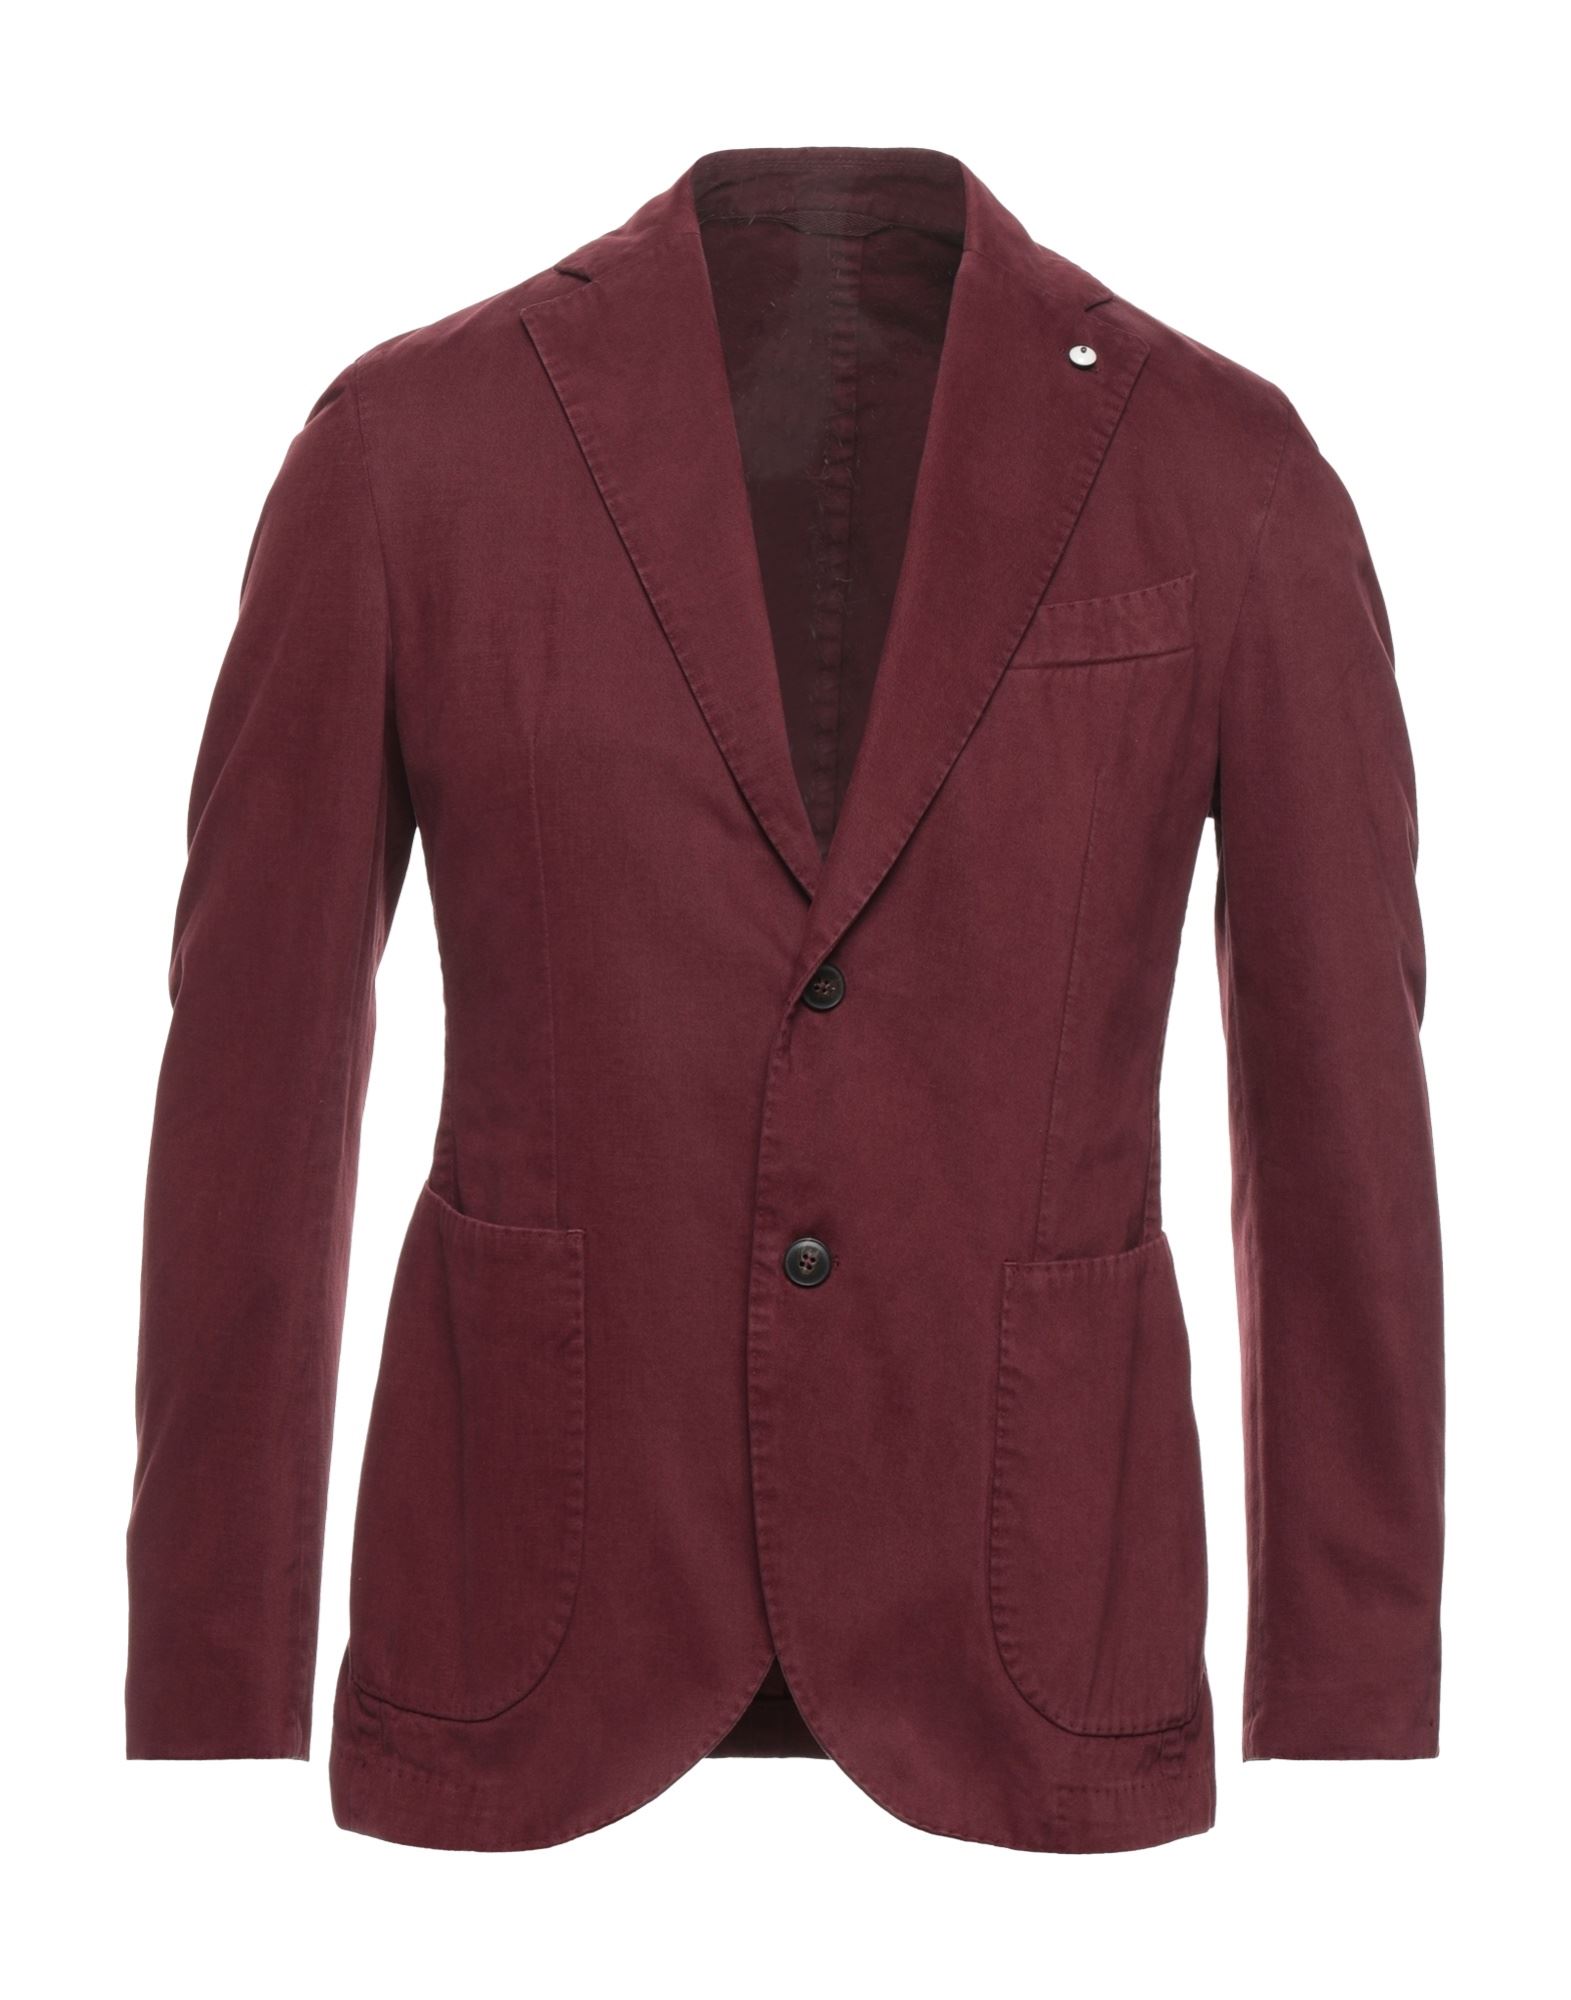 Lbm 1911 Suit Jackets In Maroon